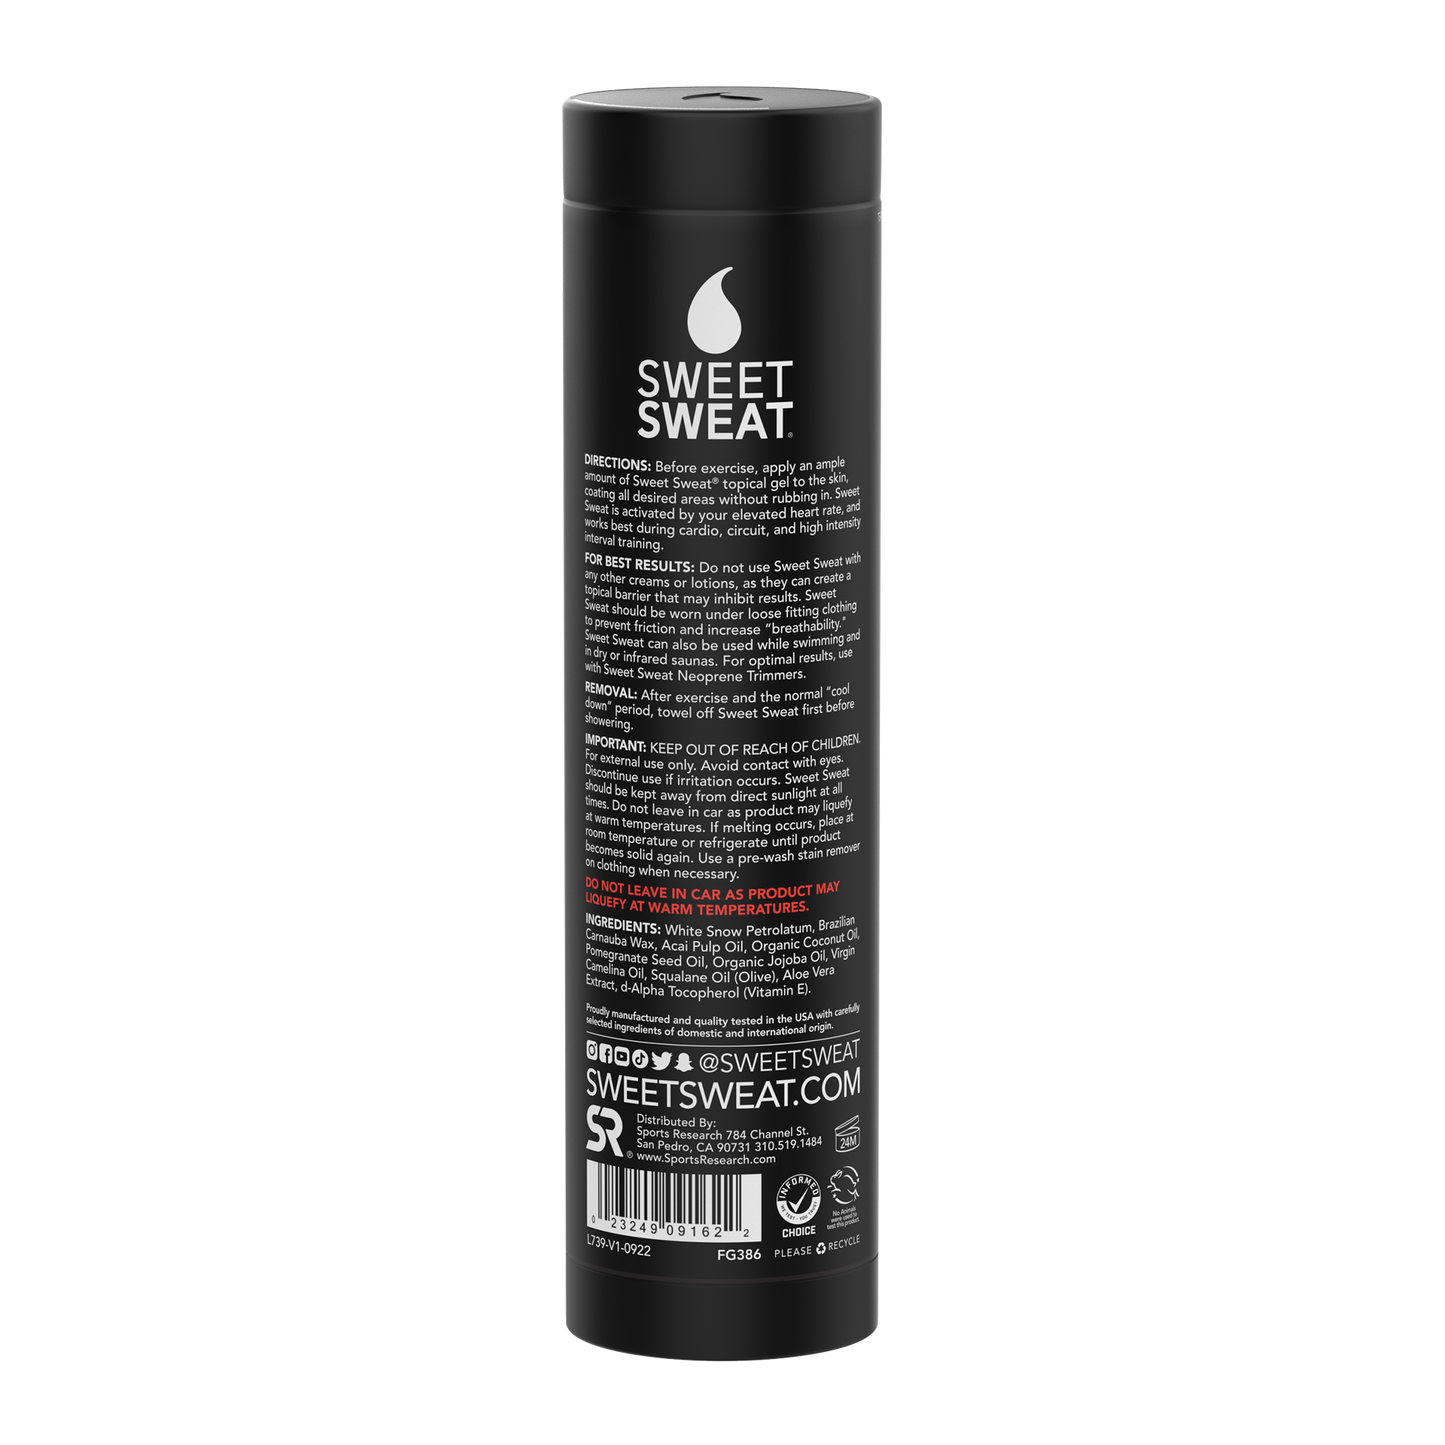 A Sweet Sweat® Stick 6.4 oz - Unscented bottle of shave cream on a white background.